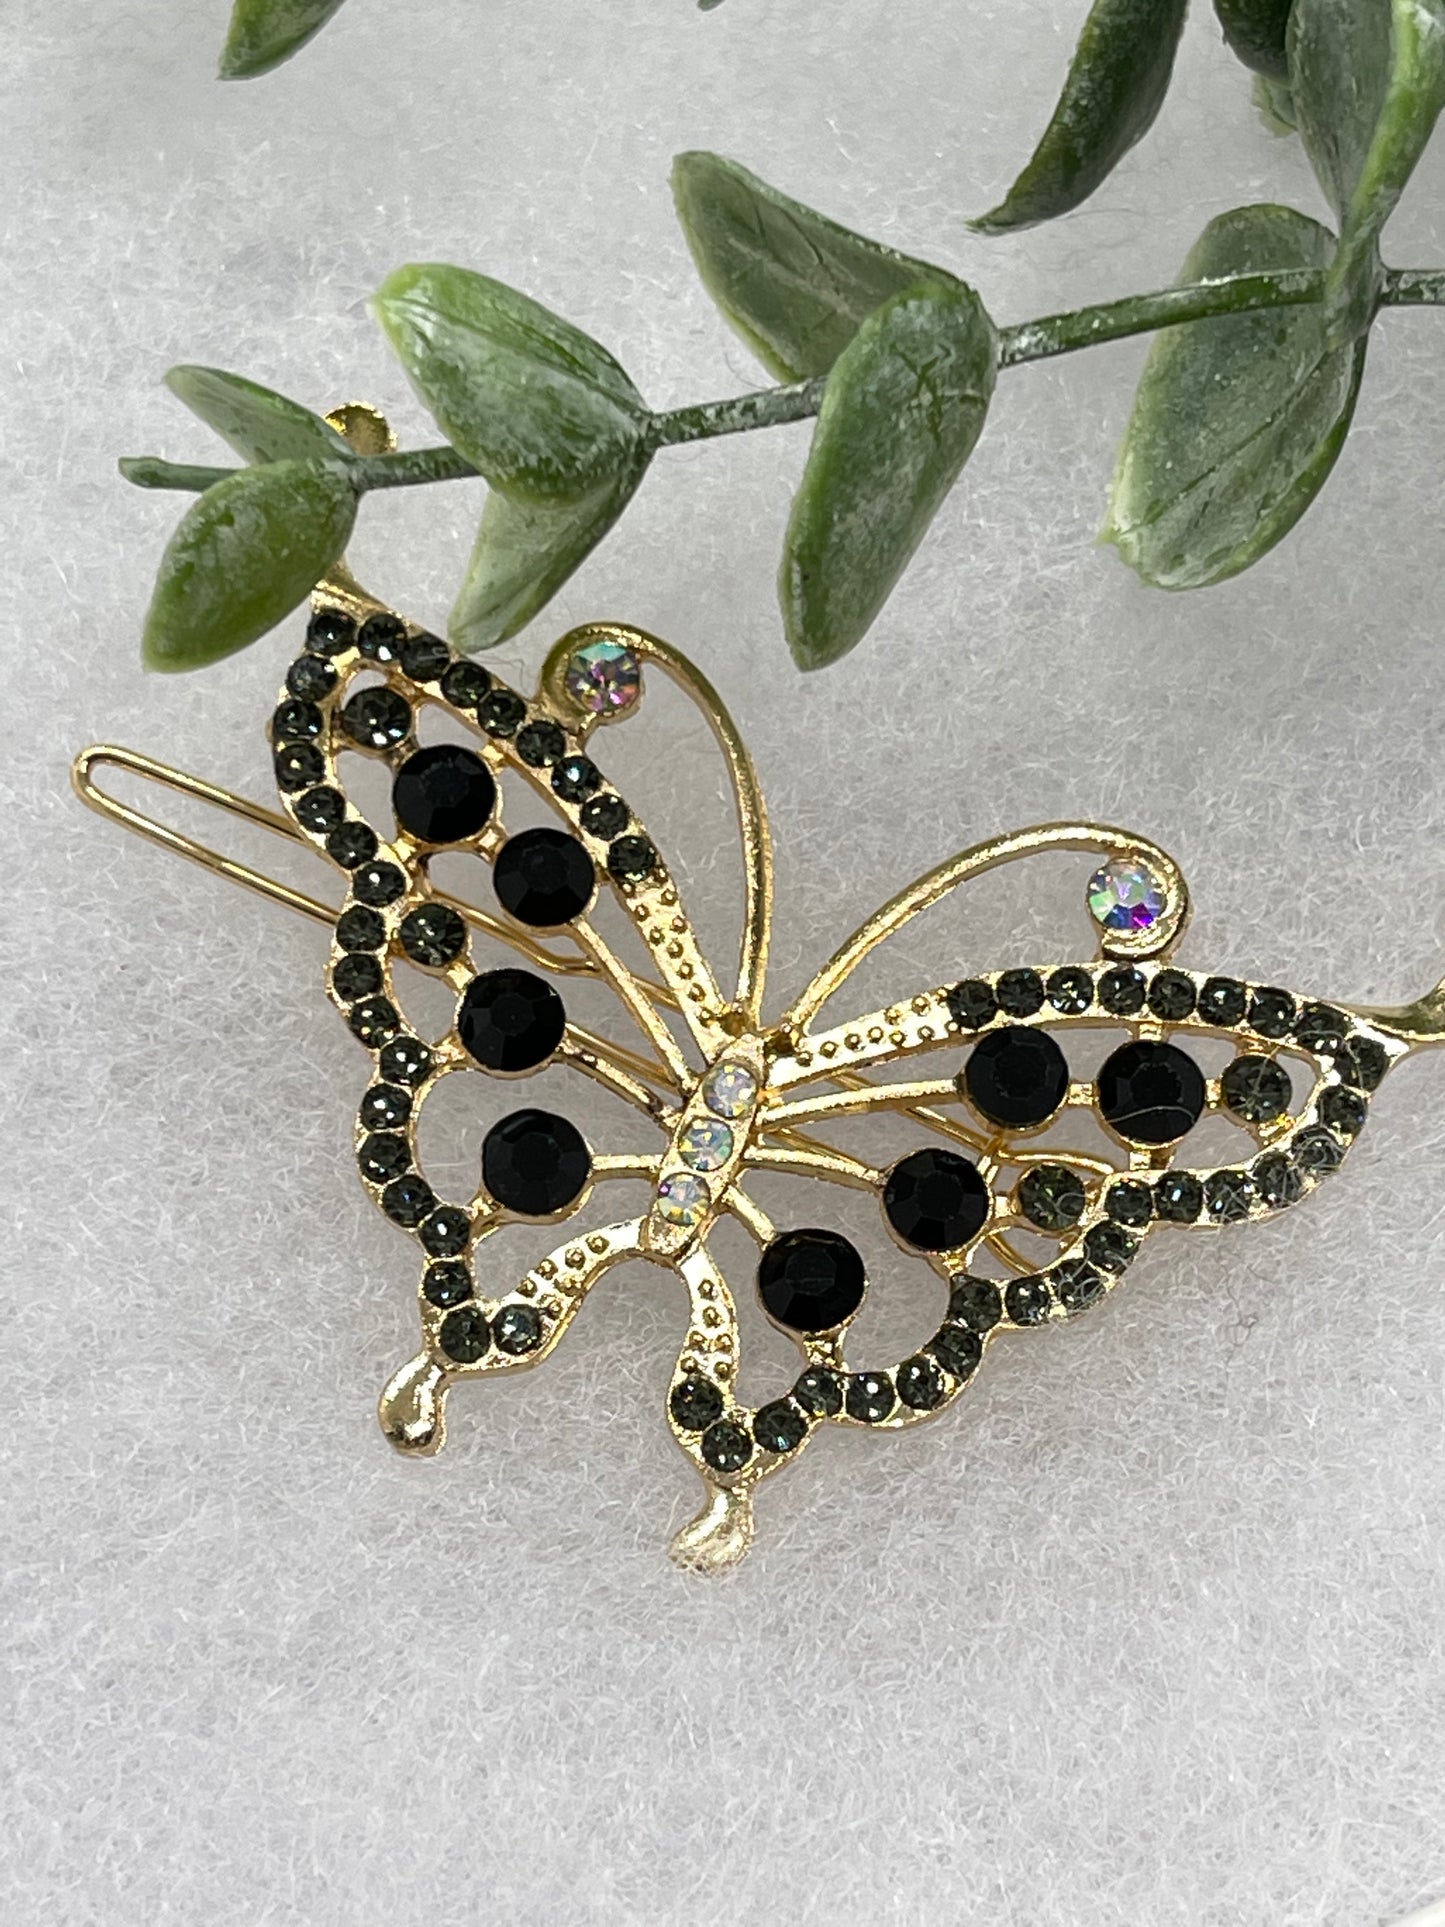 Black gold butterfly Crystal Rhinestone Barrette approximately 3.5”Metal gold tone formal hair accessory